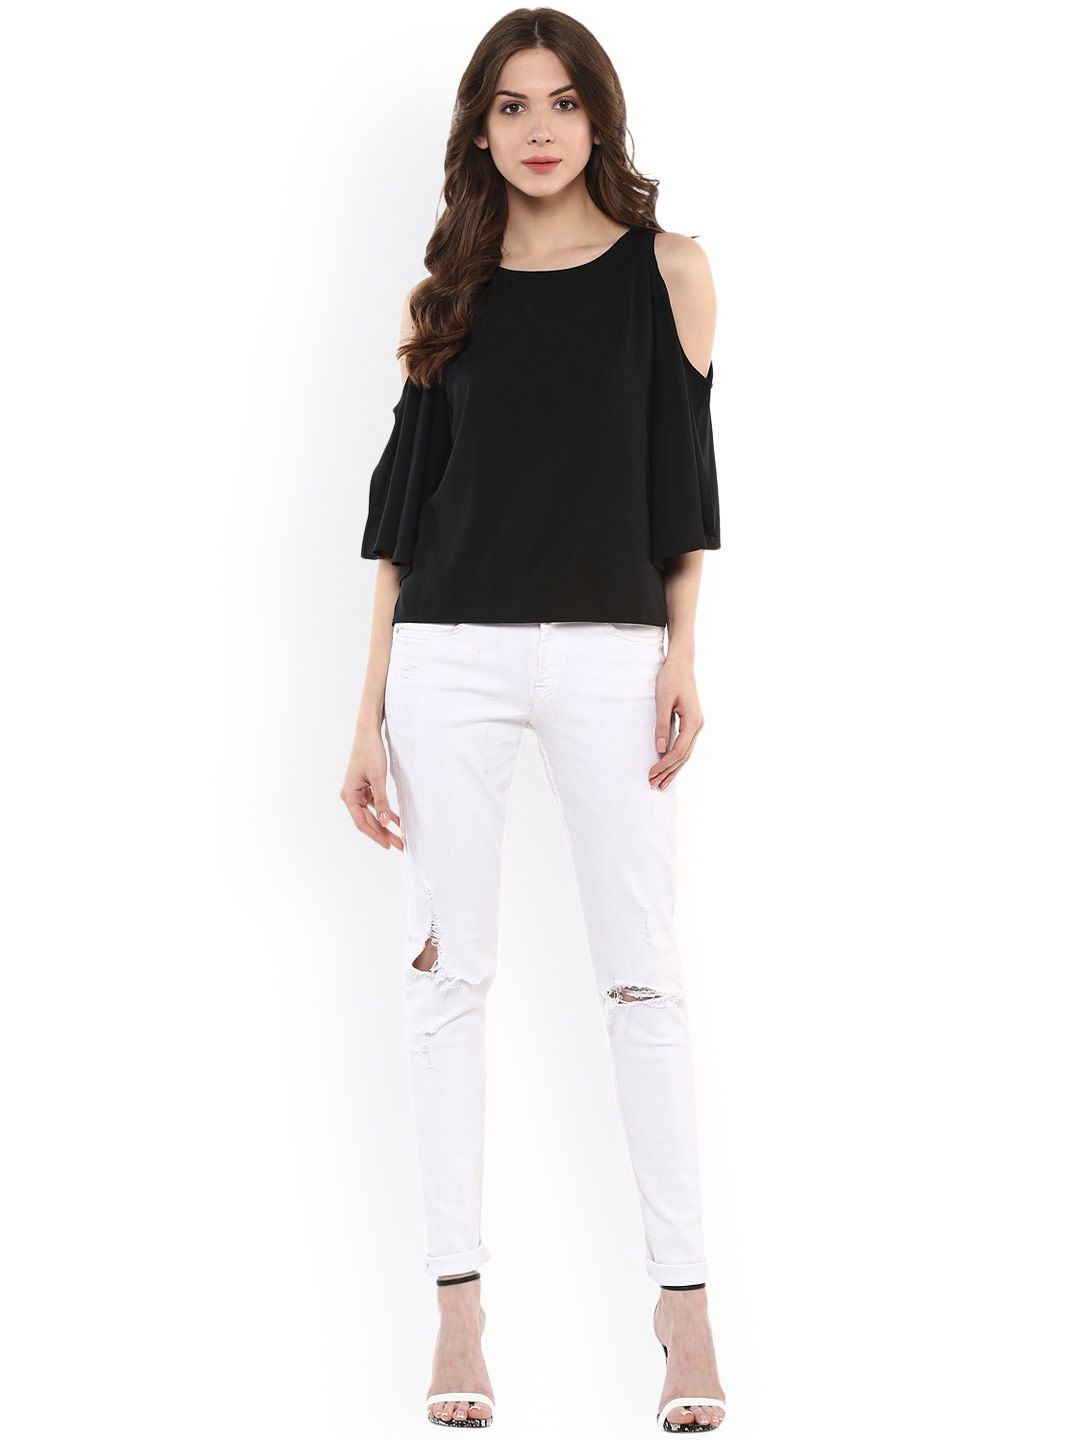 Trendy Solid Casual Crepe Tops